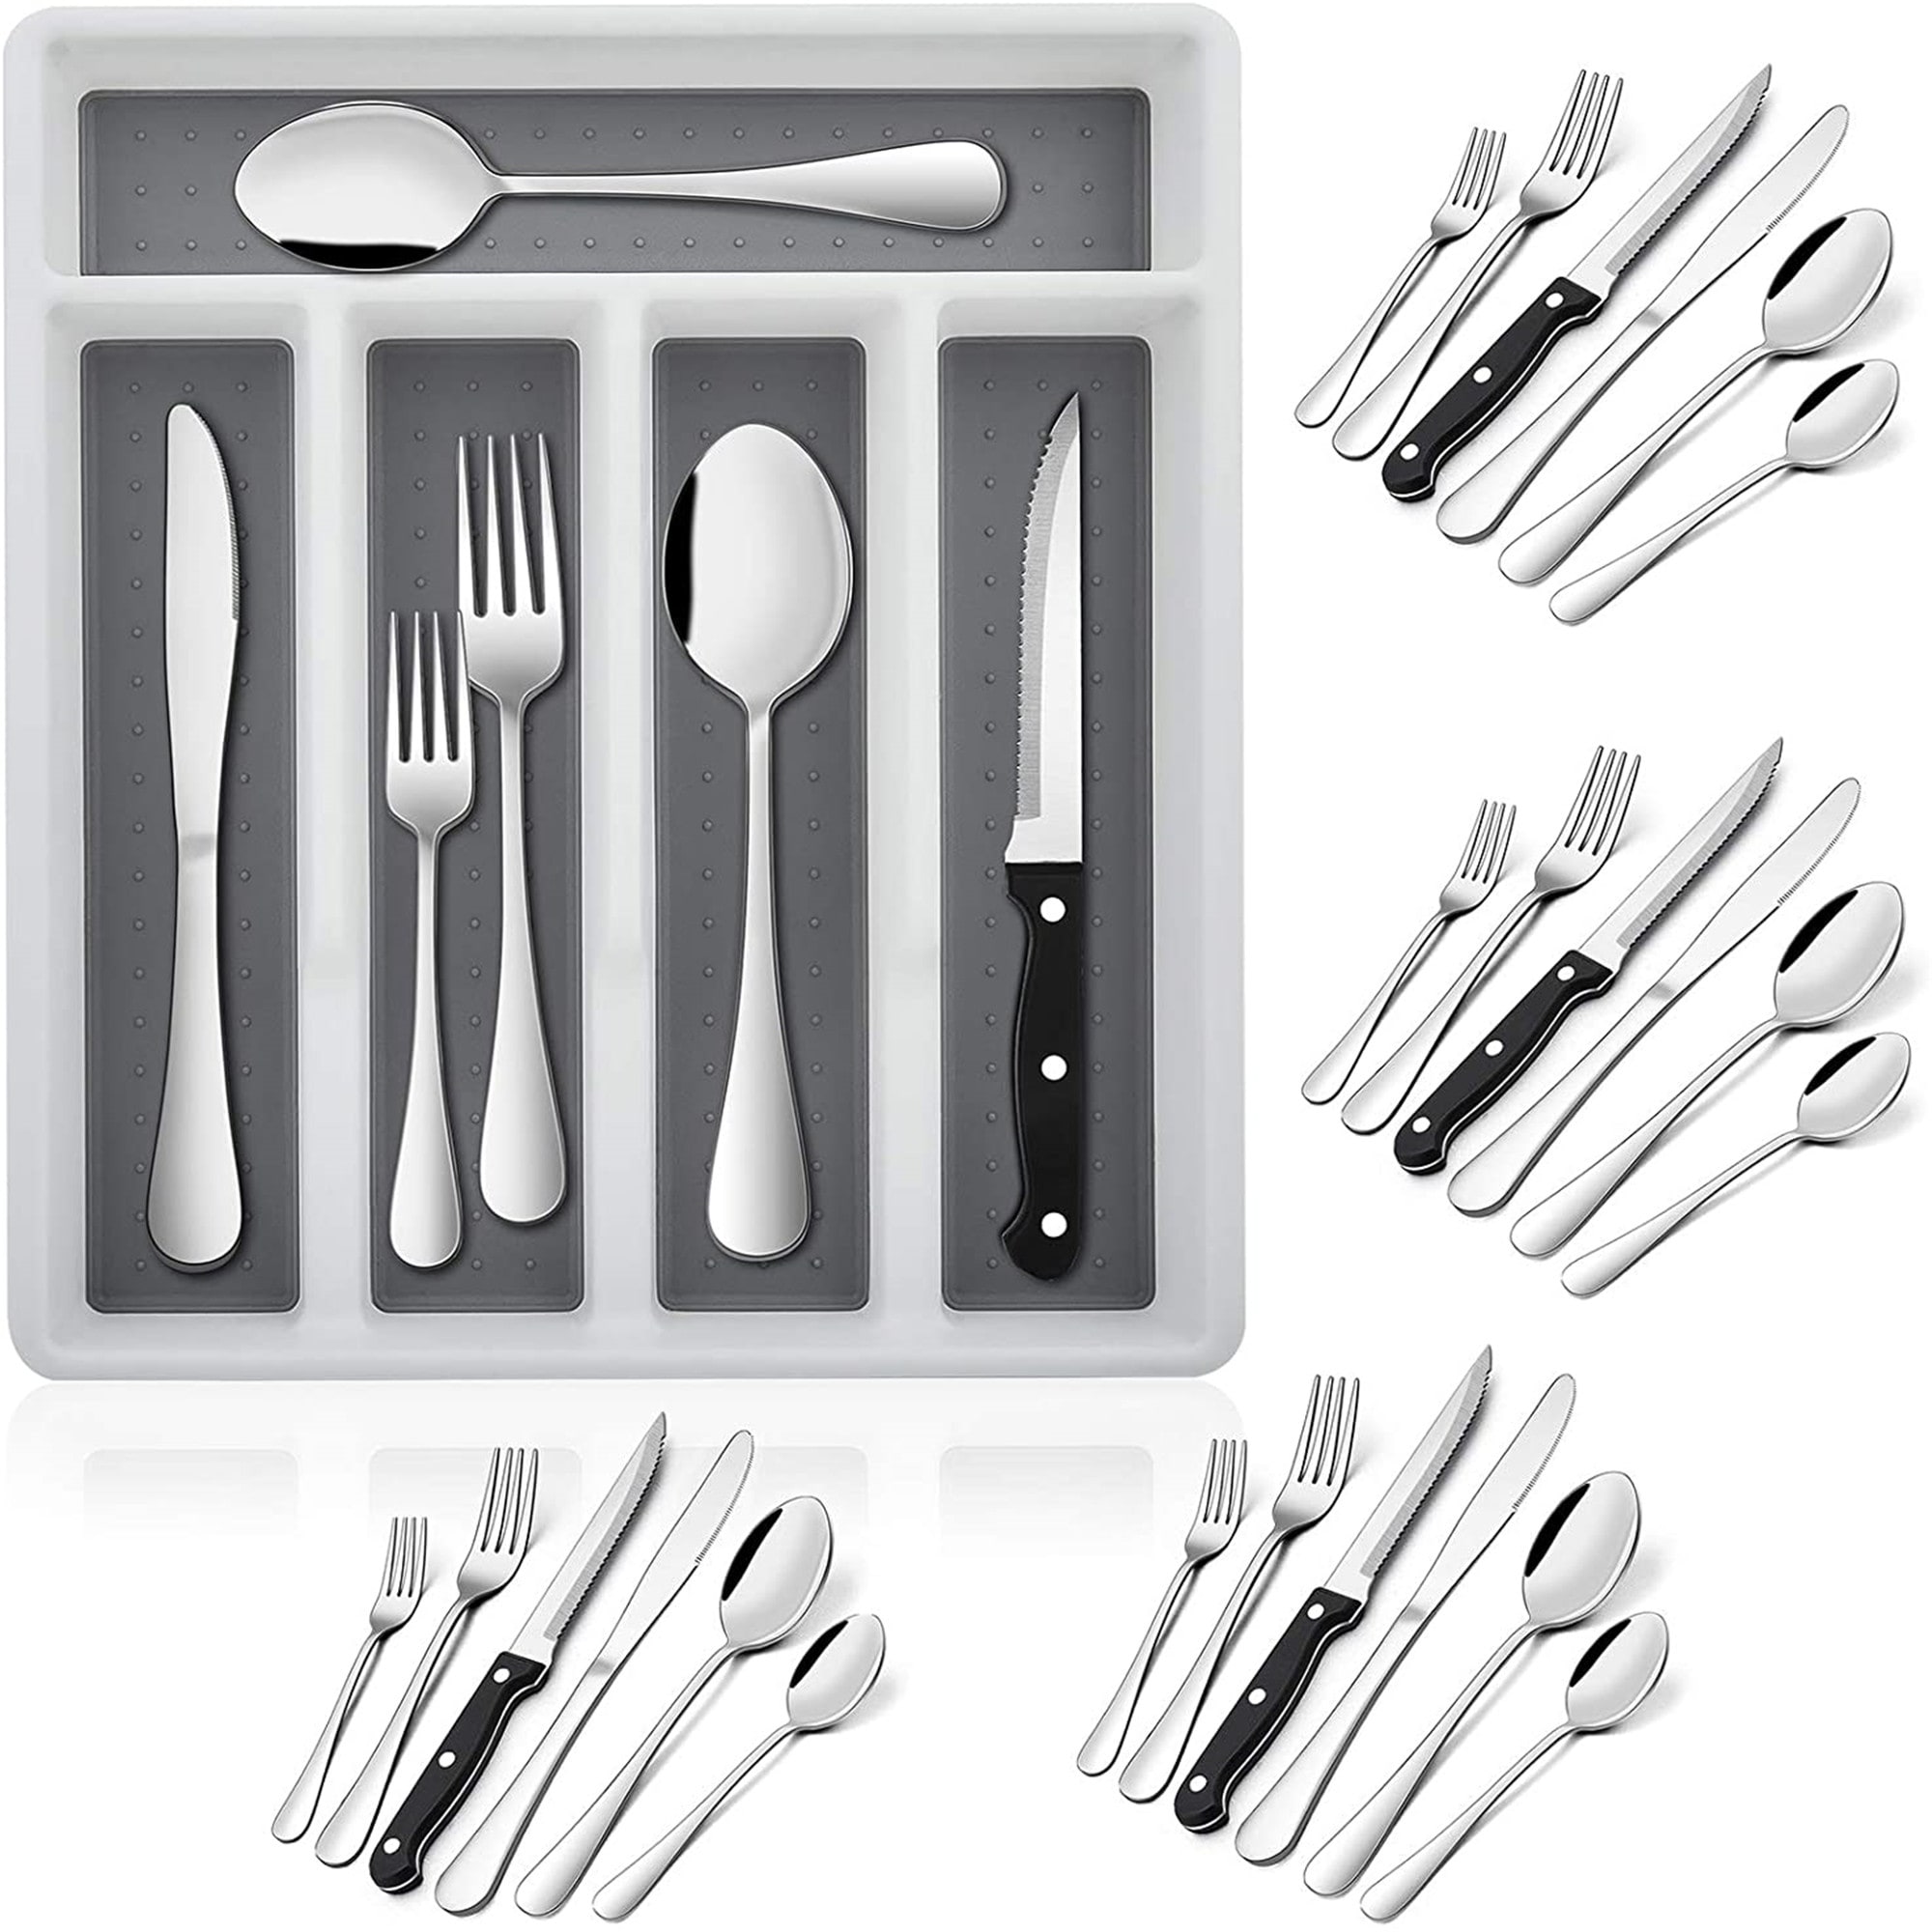 24-Piece Silverware Set with Steak Knives and Organizer Tray, Stainless  Steel Flatware, Mirror Polished, Dishwasher Safe - Bed Bath & Beyond -  33028443